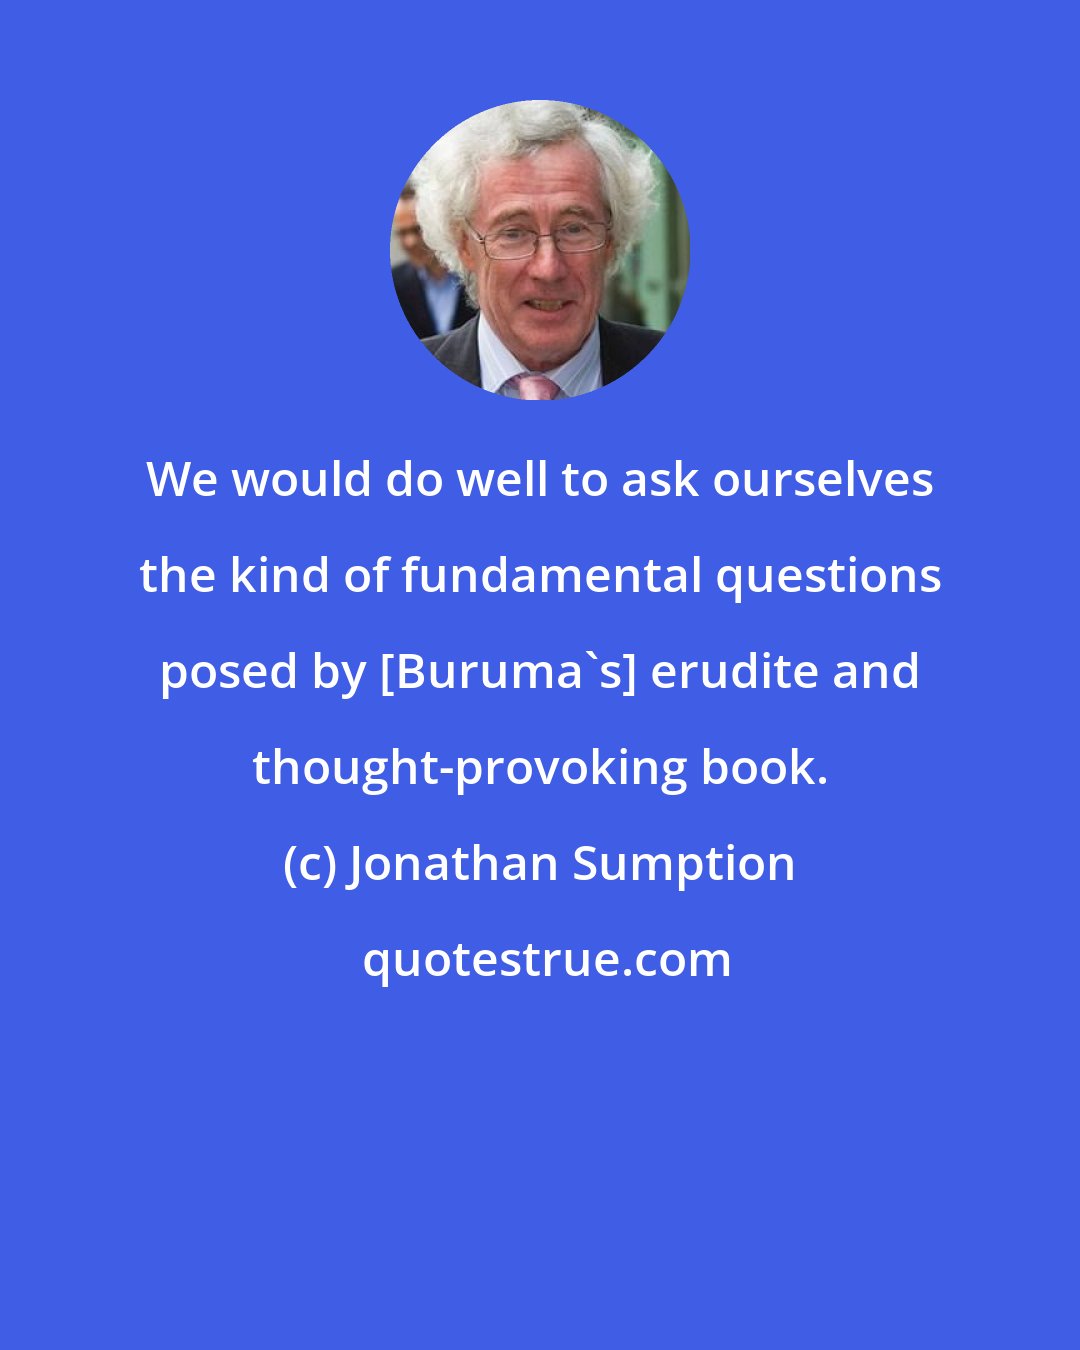 Jonathan Sumption: We would do well to ask ourselves the kind of fundamental questions posed by [Buruma's] erudite and thought-provoking book.